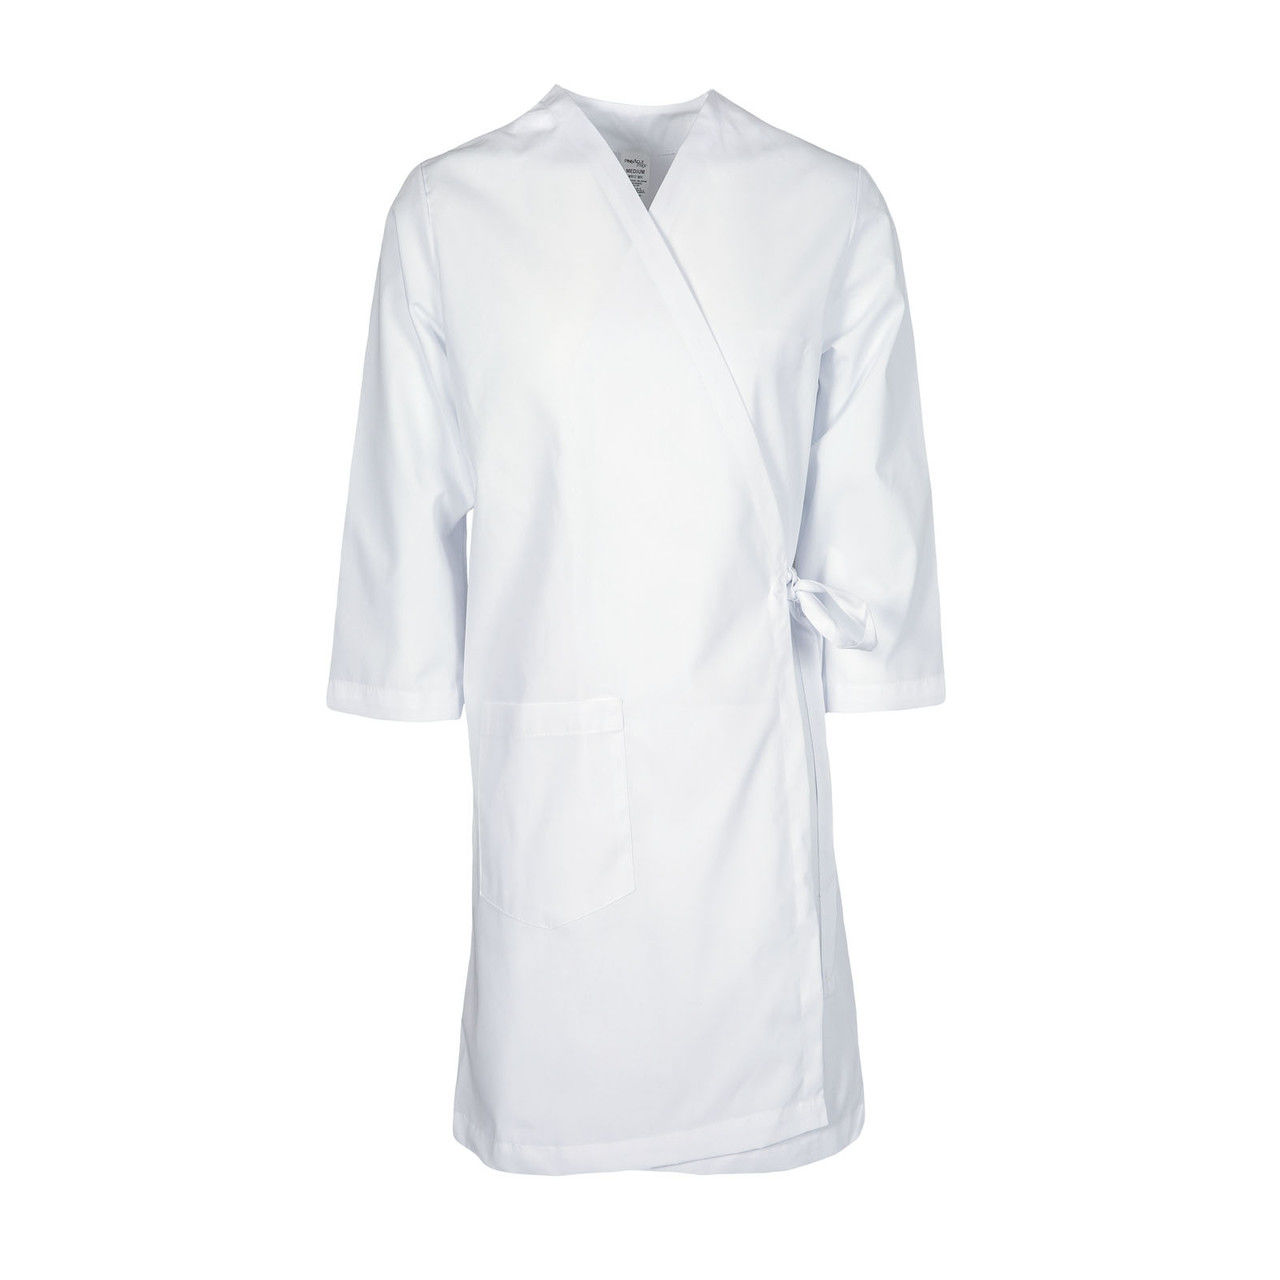 Can you provide the size chart for the 3 Pocket White smock gown?